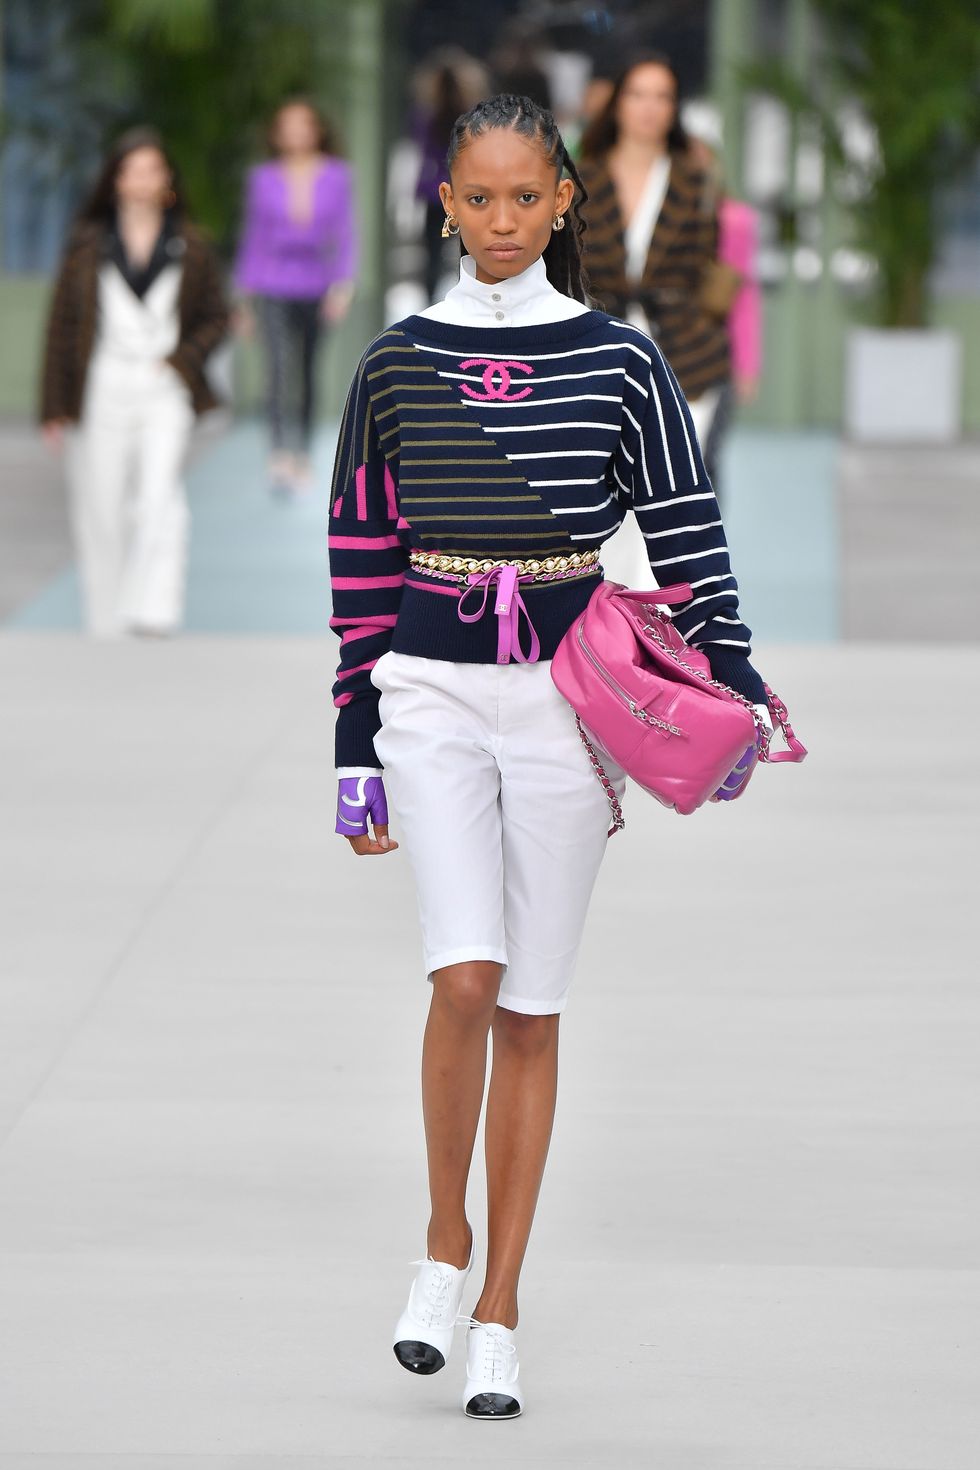 Shopping made easy and fun Chanel Cruise 2020 - New Chanel